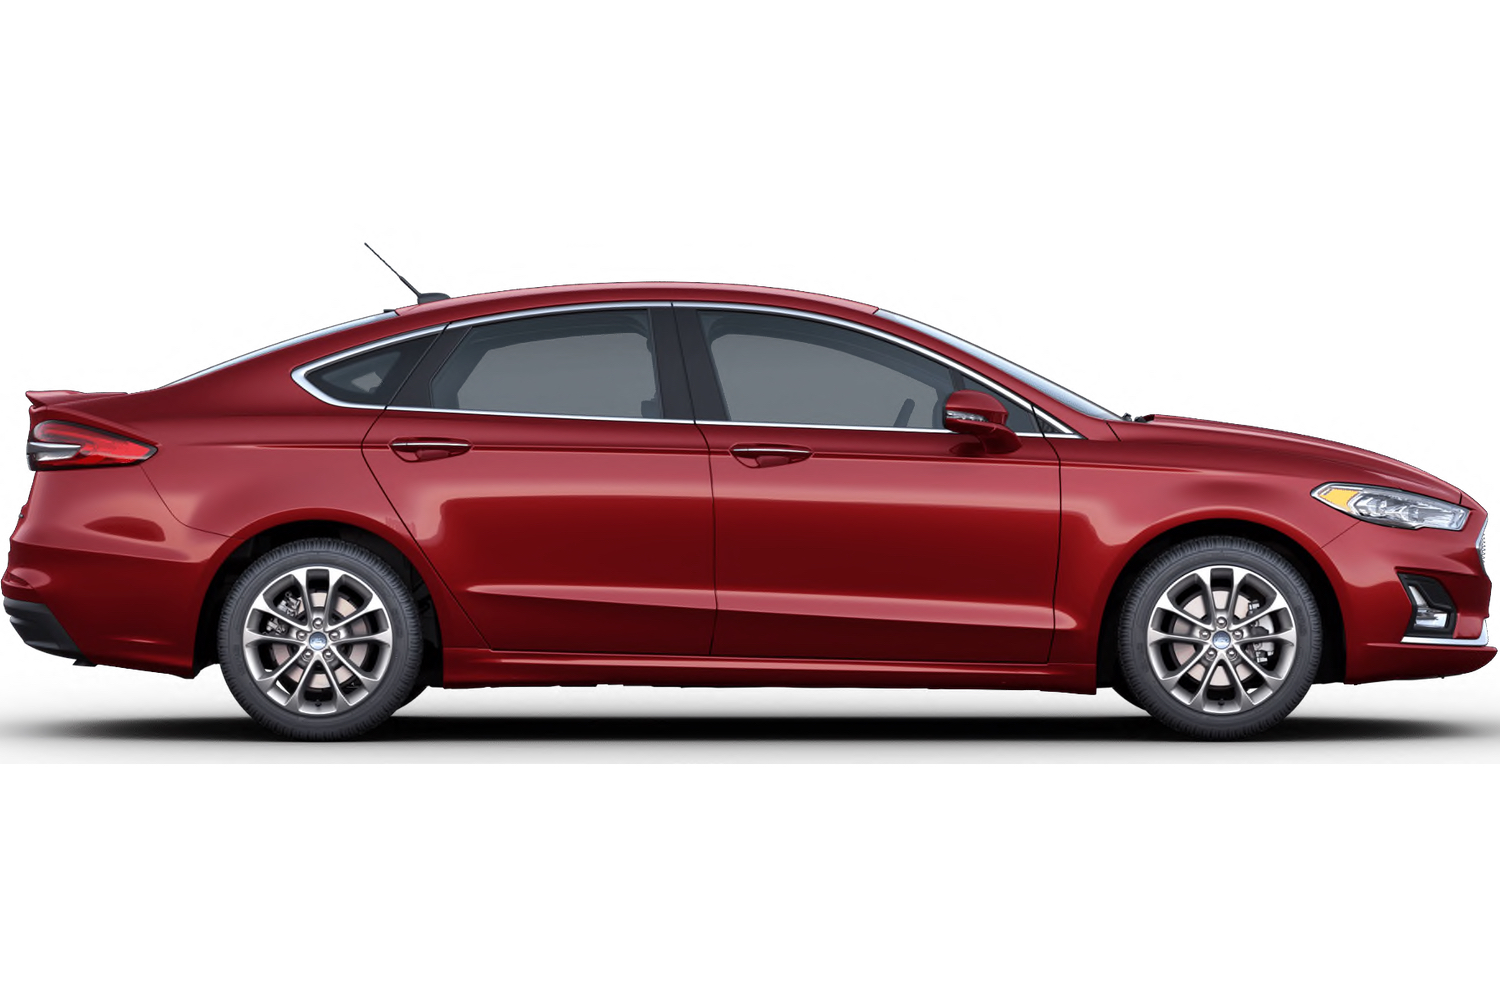 2020 Ford Fusion Rapid Red D4 005